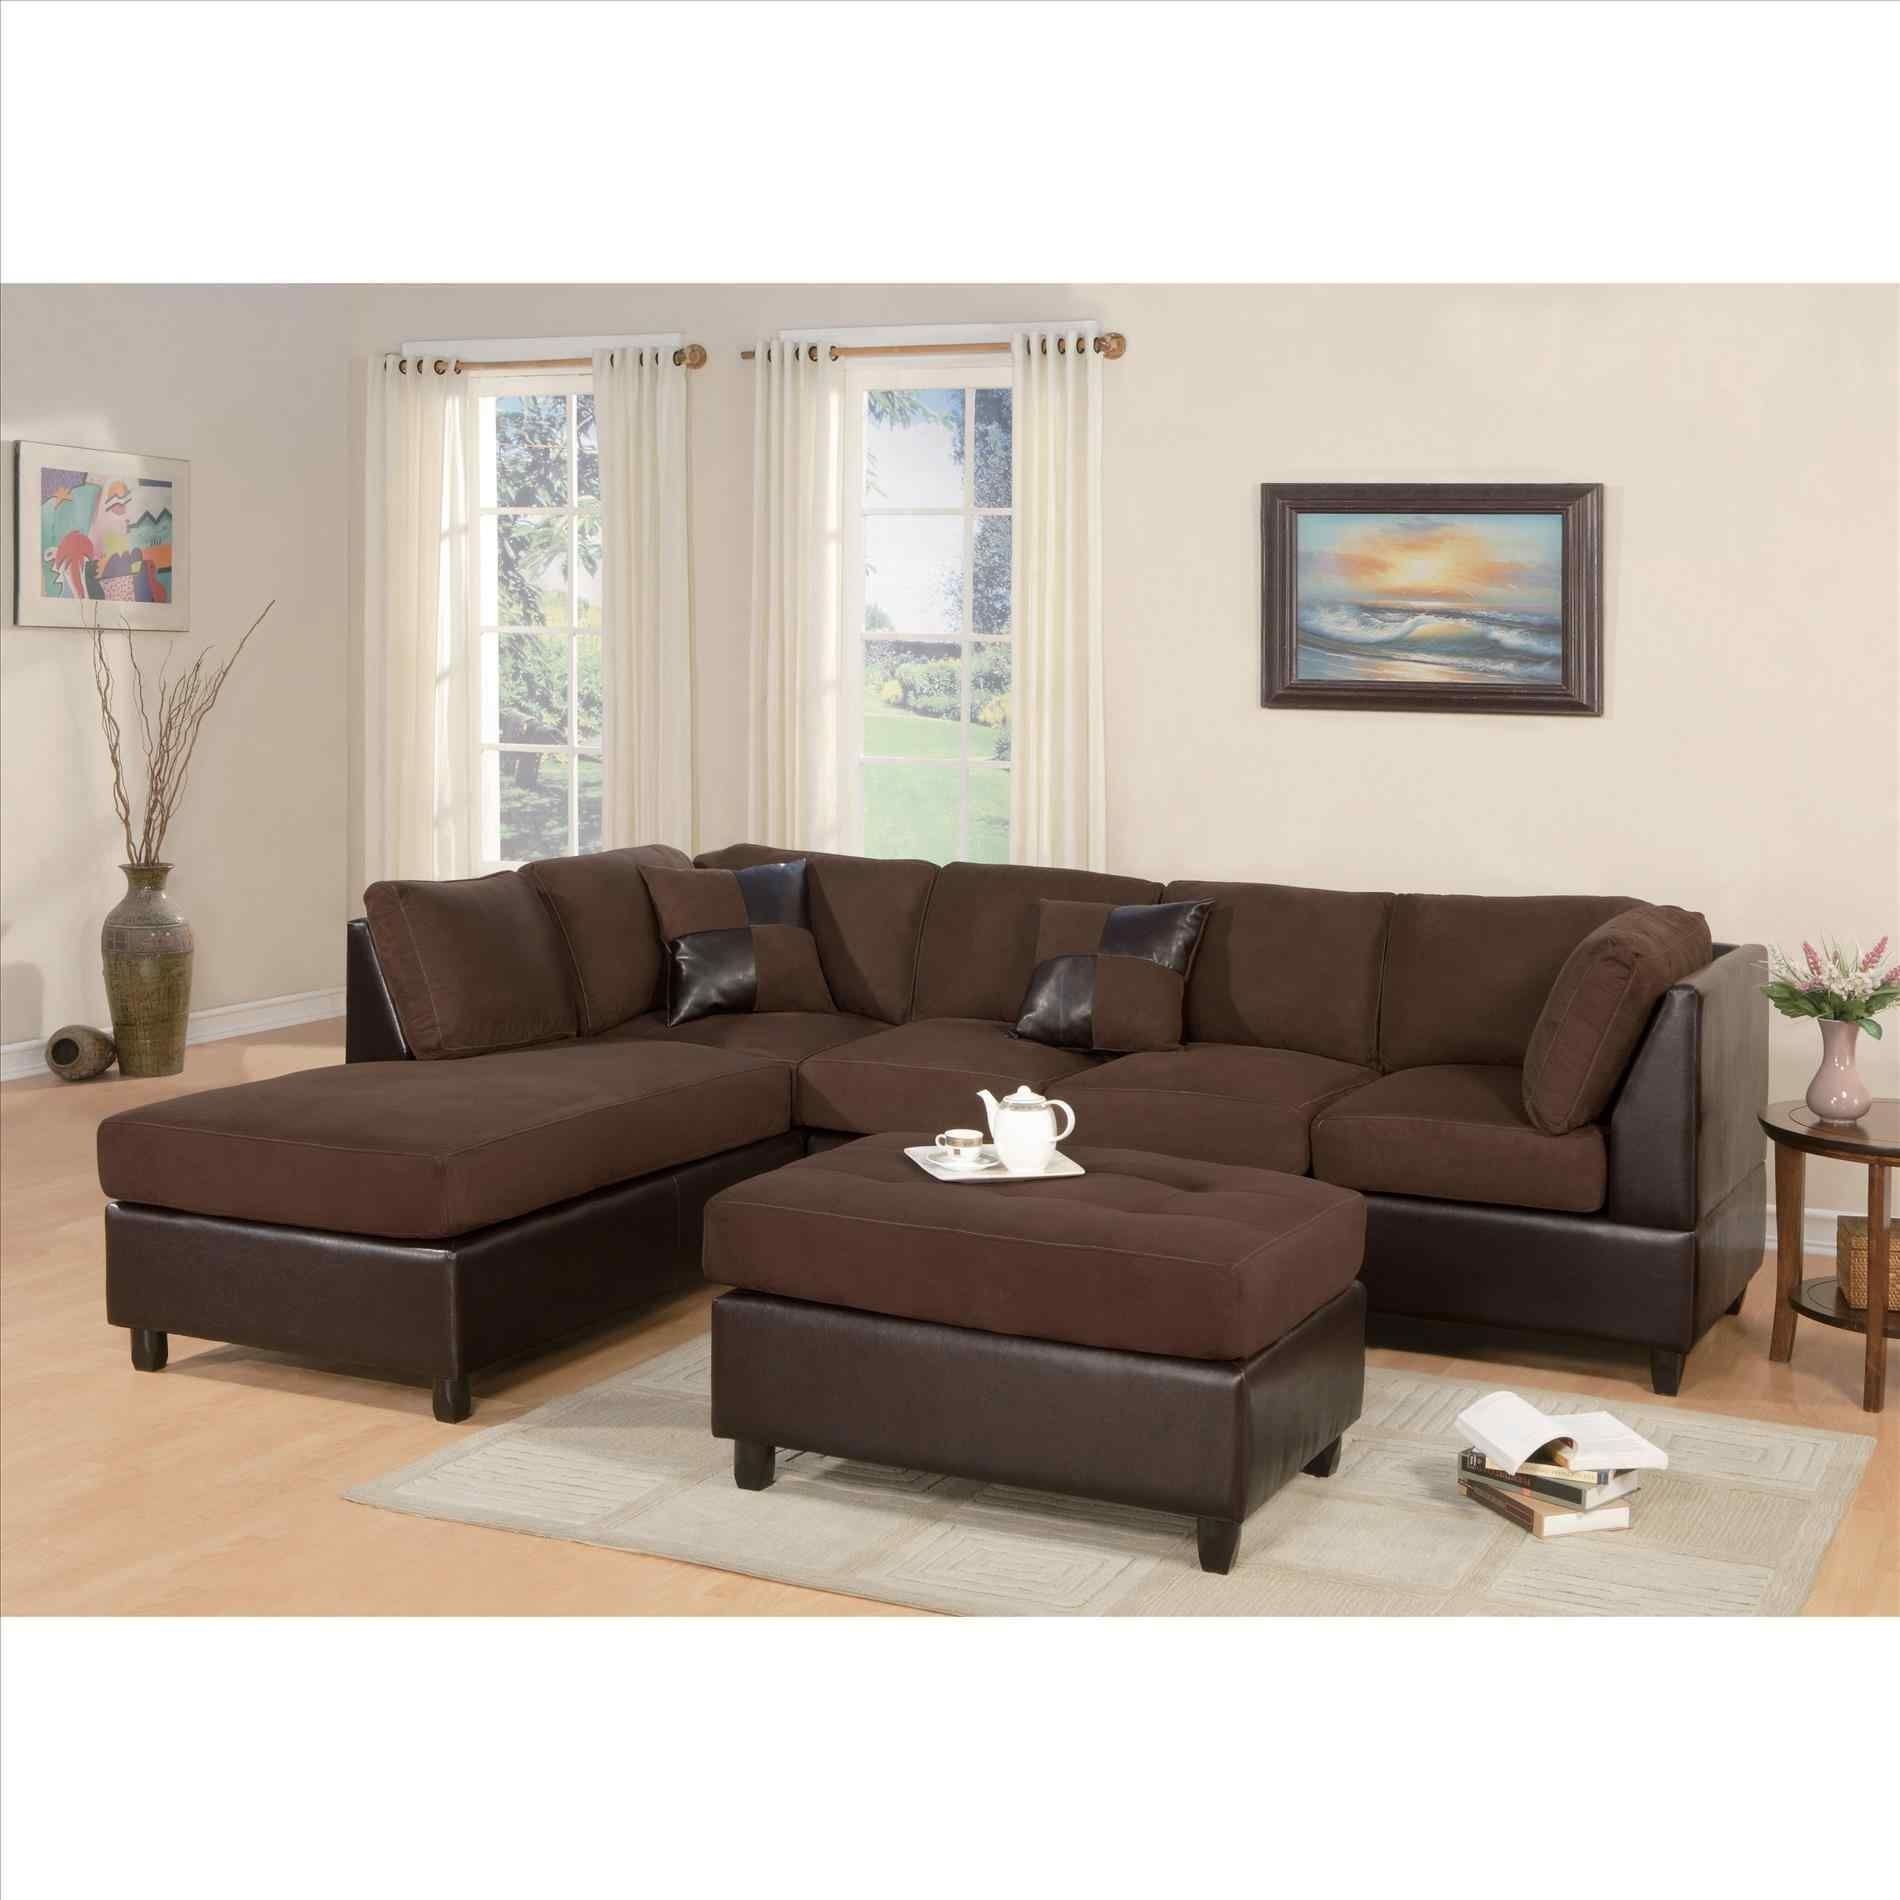 Cheap Sectional Sofas Houston Tx | Best Furniture For Home Design Styles In Houston Tx Sectional Sofas (View 10 of 10)